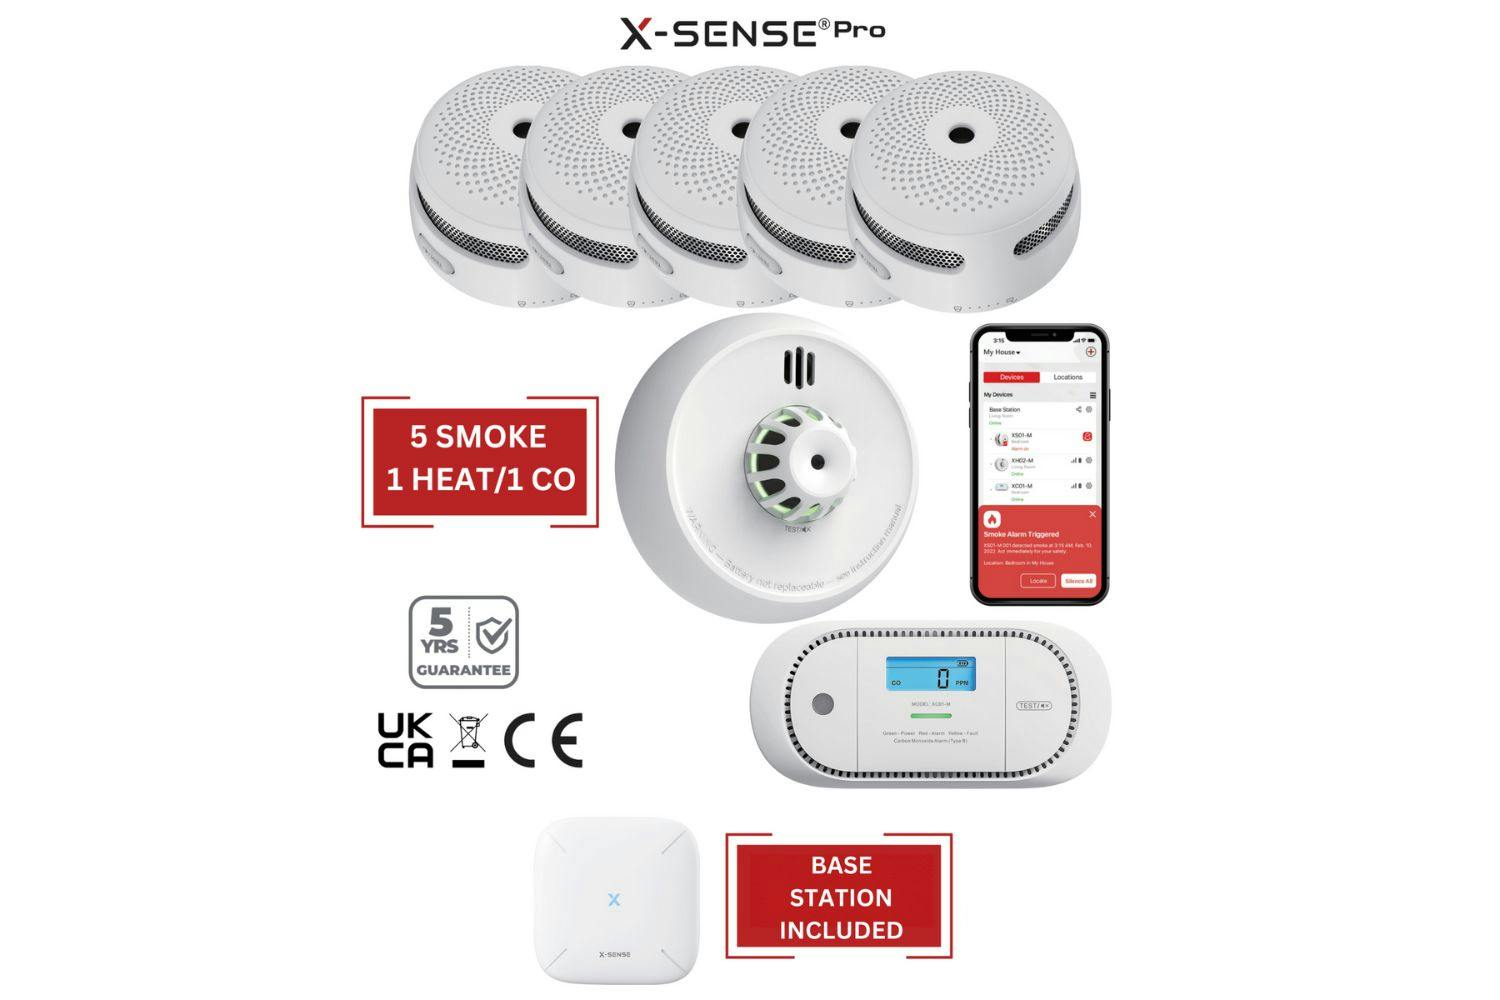 X-Sense Smart Smoke Detector Heat Alarm And Co Detector Home Fire Protection Kit With Base Station | 5 Smoke / 1 Heat / 1 Carbon